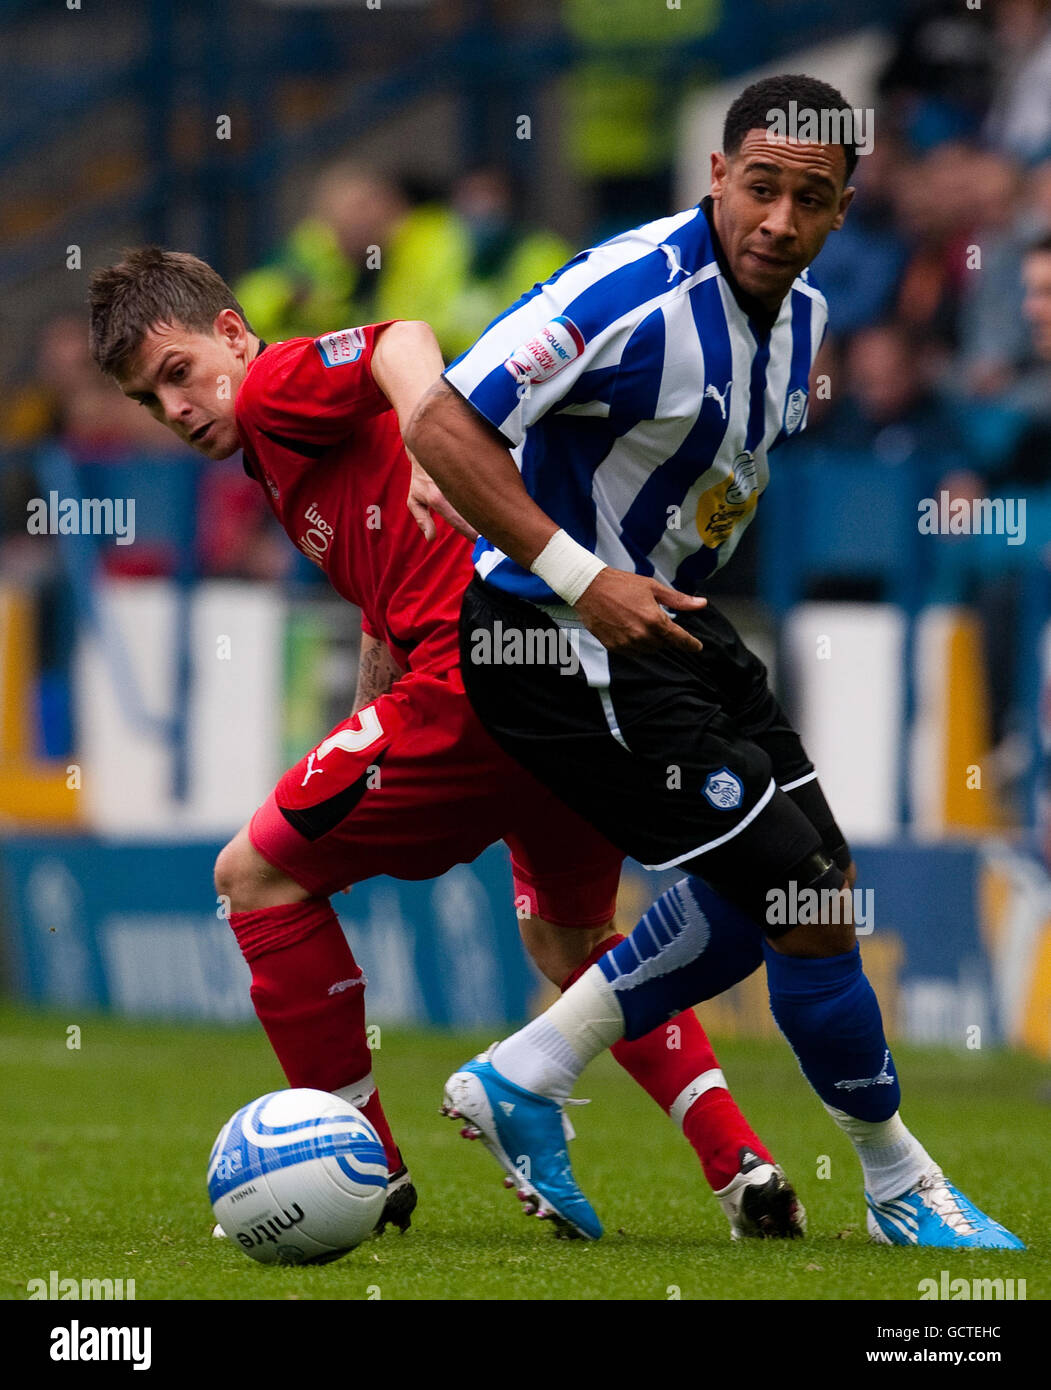 Sheffield Wednesday's Jon Otsemobor and Leyton Orient's Dean Cox (left) battle for the ball during the npower League One match at Hillsborough, Sheffield. Stock Photo